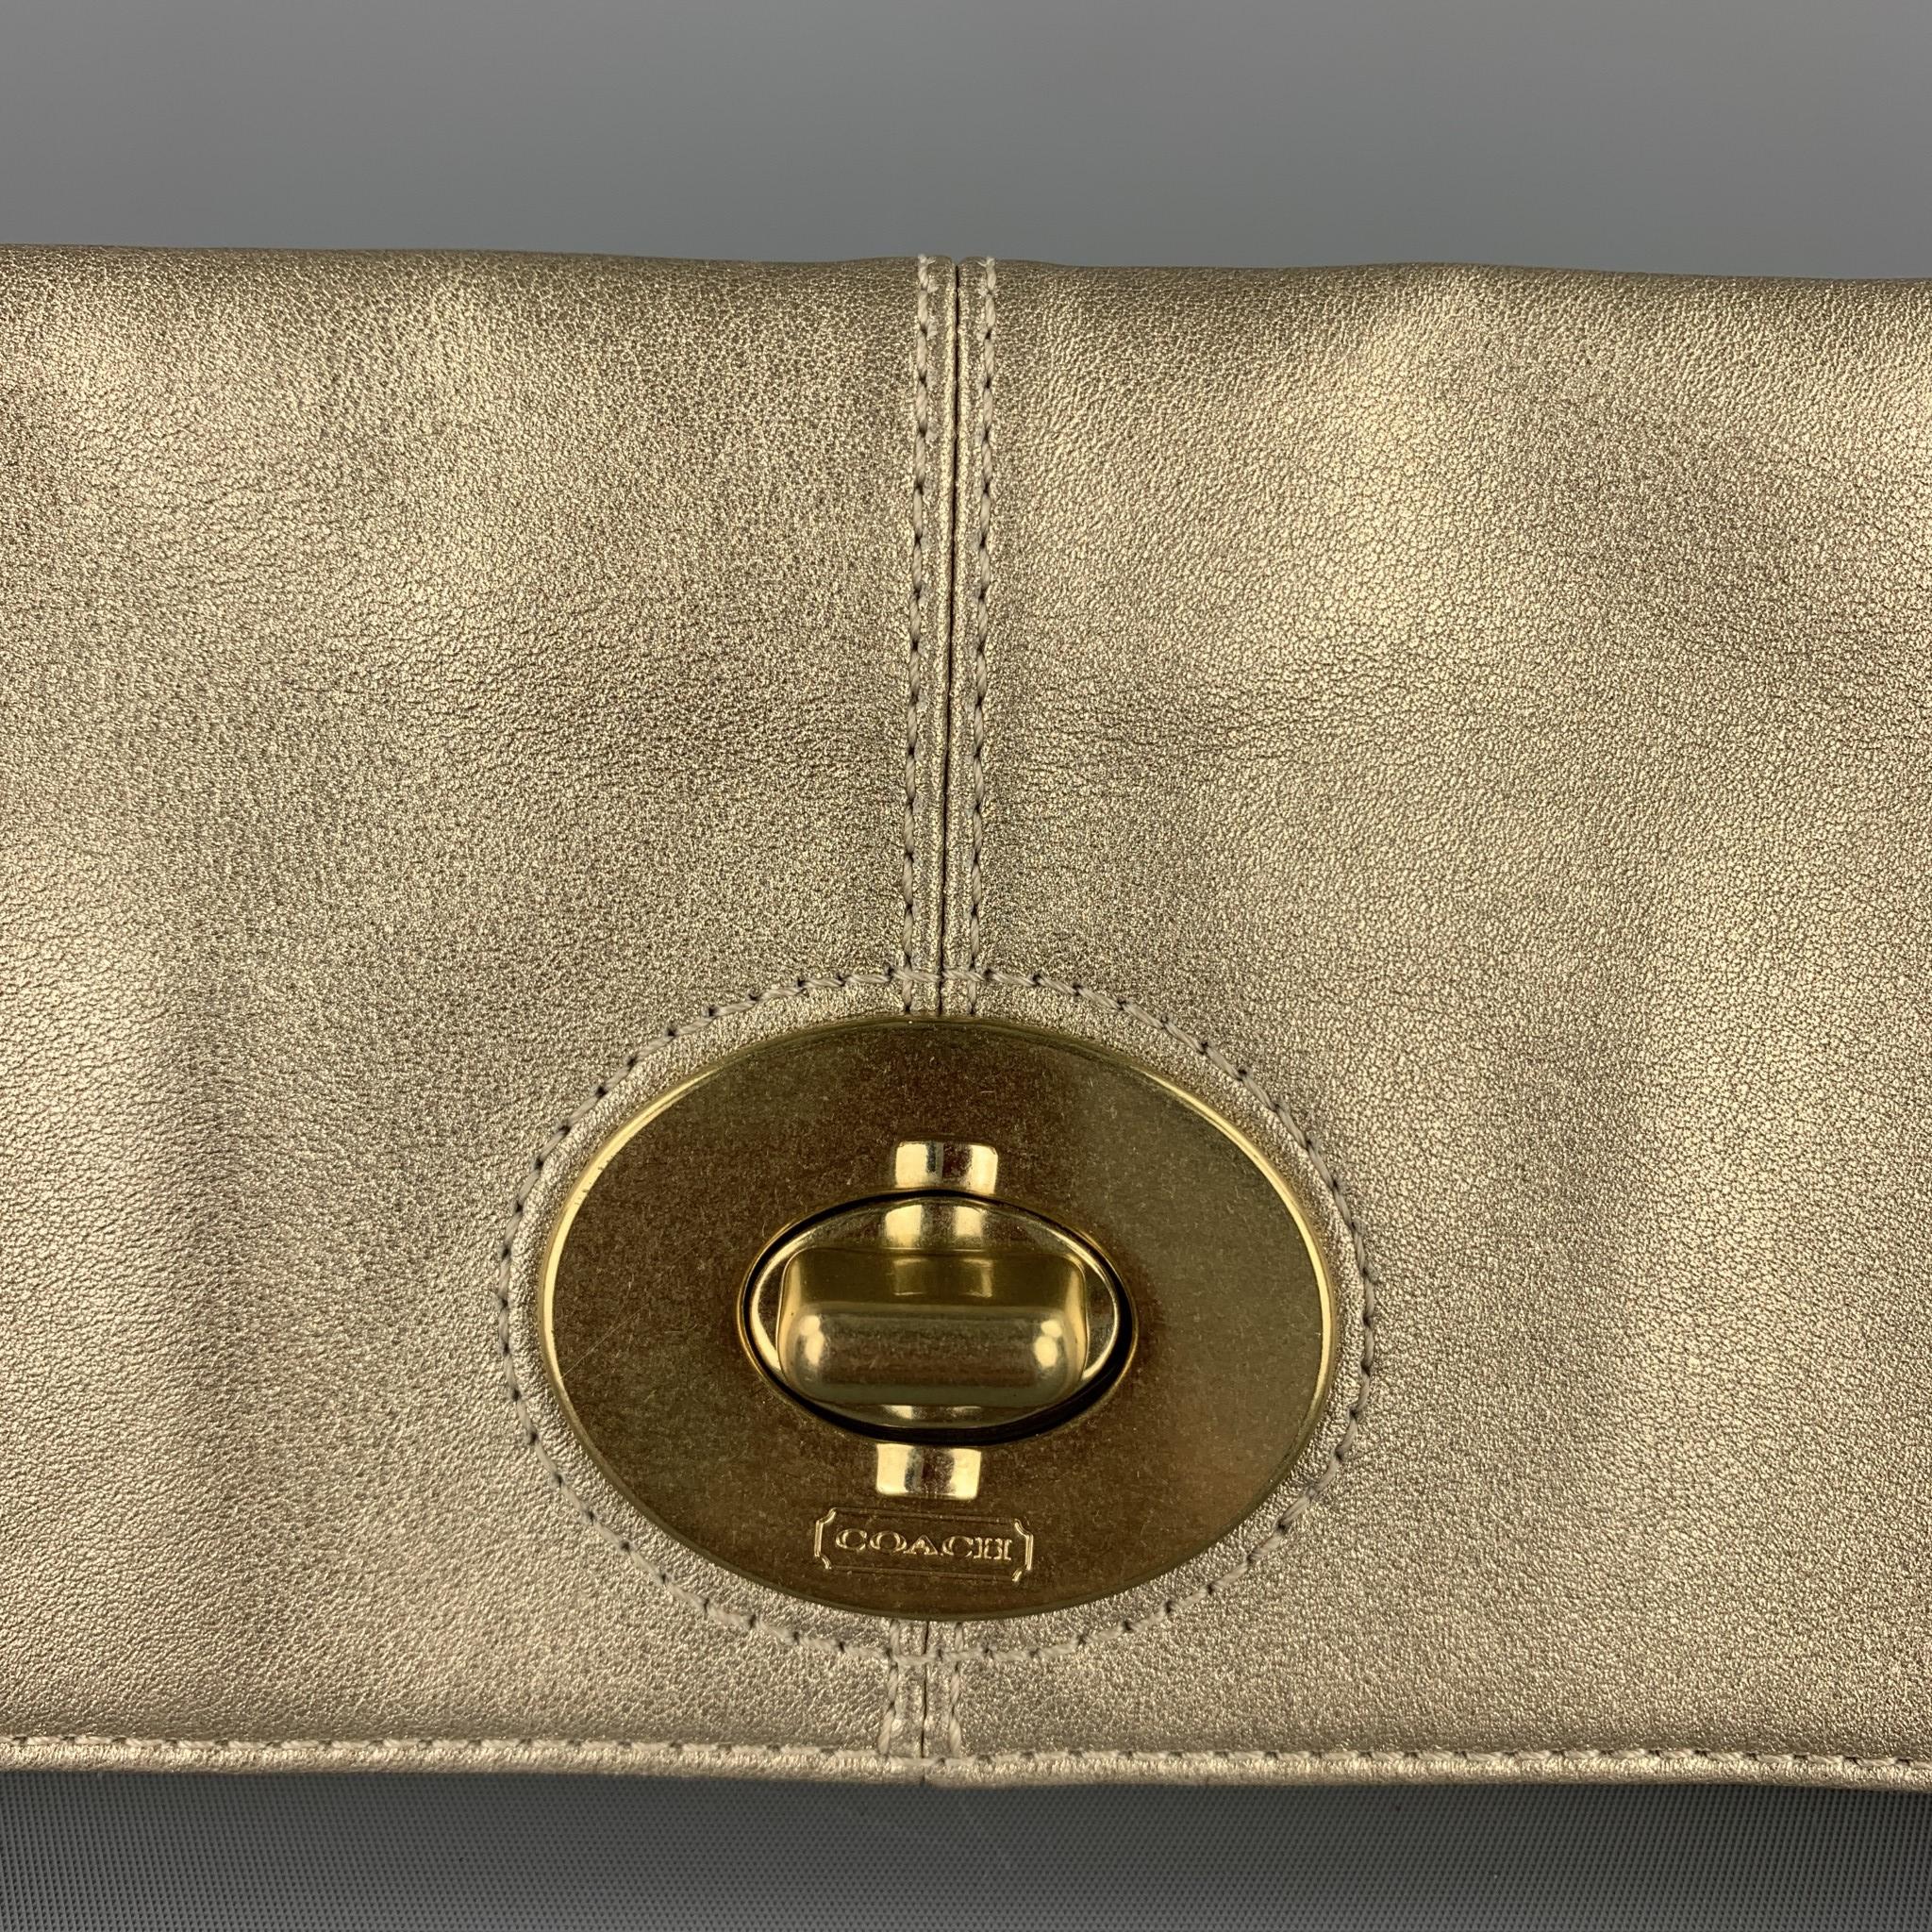 COACH purse comes in a gold leather featuring a clutch style, gold tone hardware, zipper pocket, and a clasp closure.

Good Pre-Owned Condition.

Measurements:

Length: 10 in. 
Width: 0.5 in. 
Height: 8 in. 